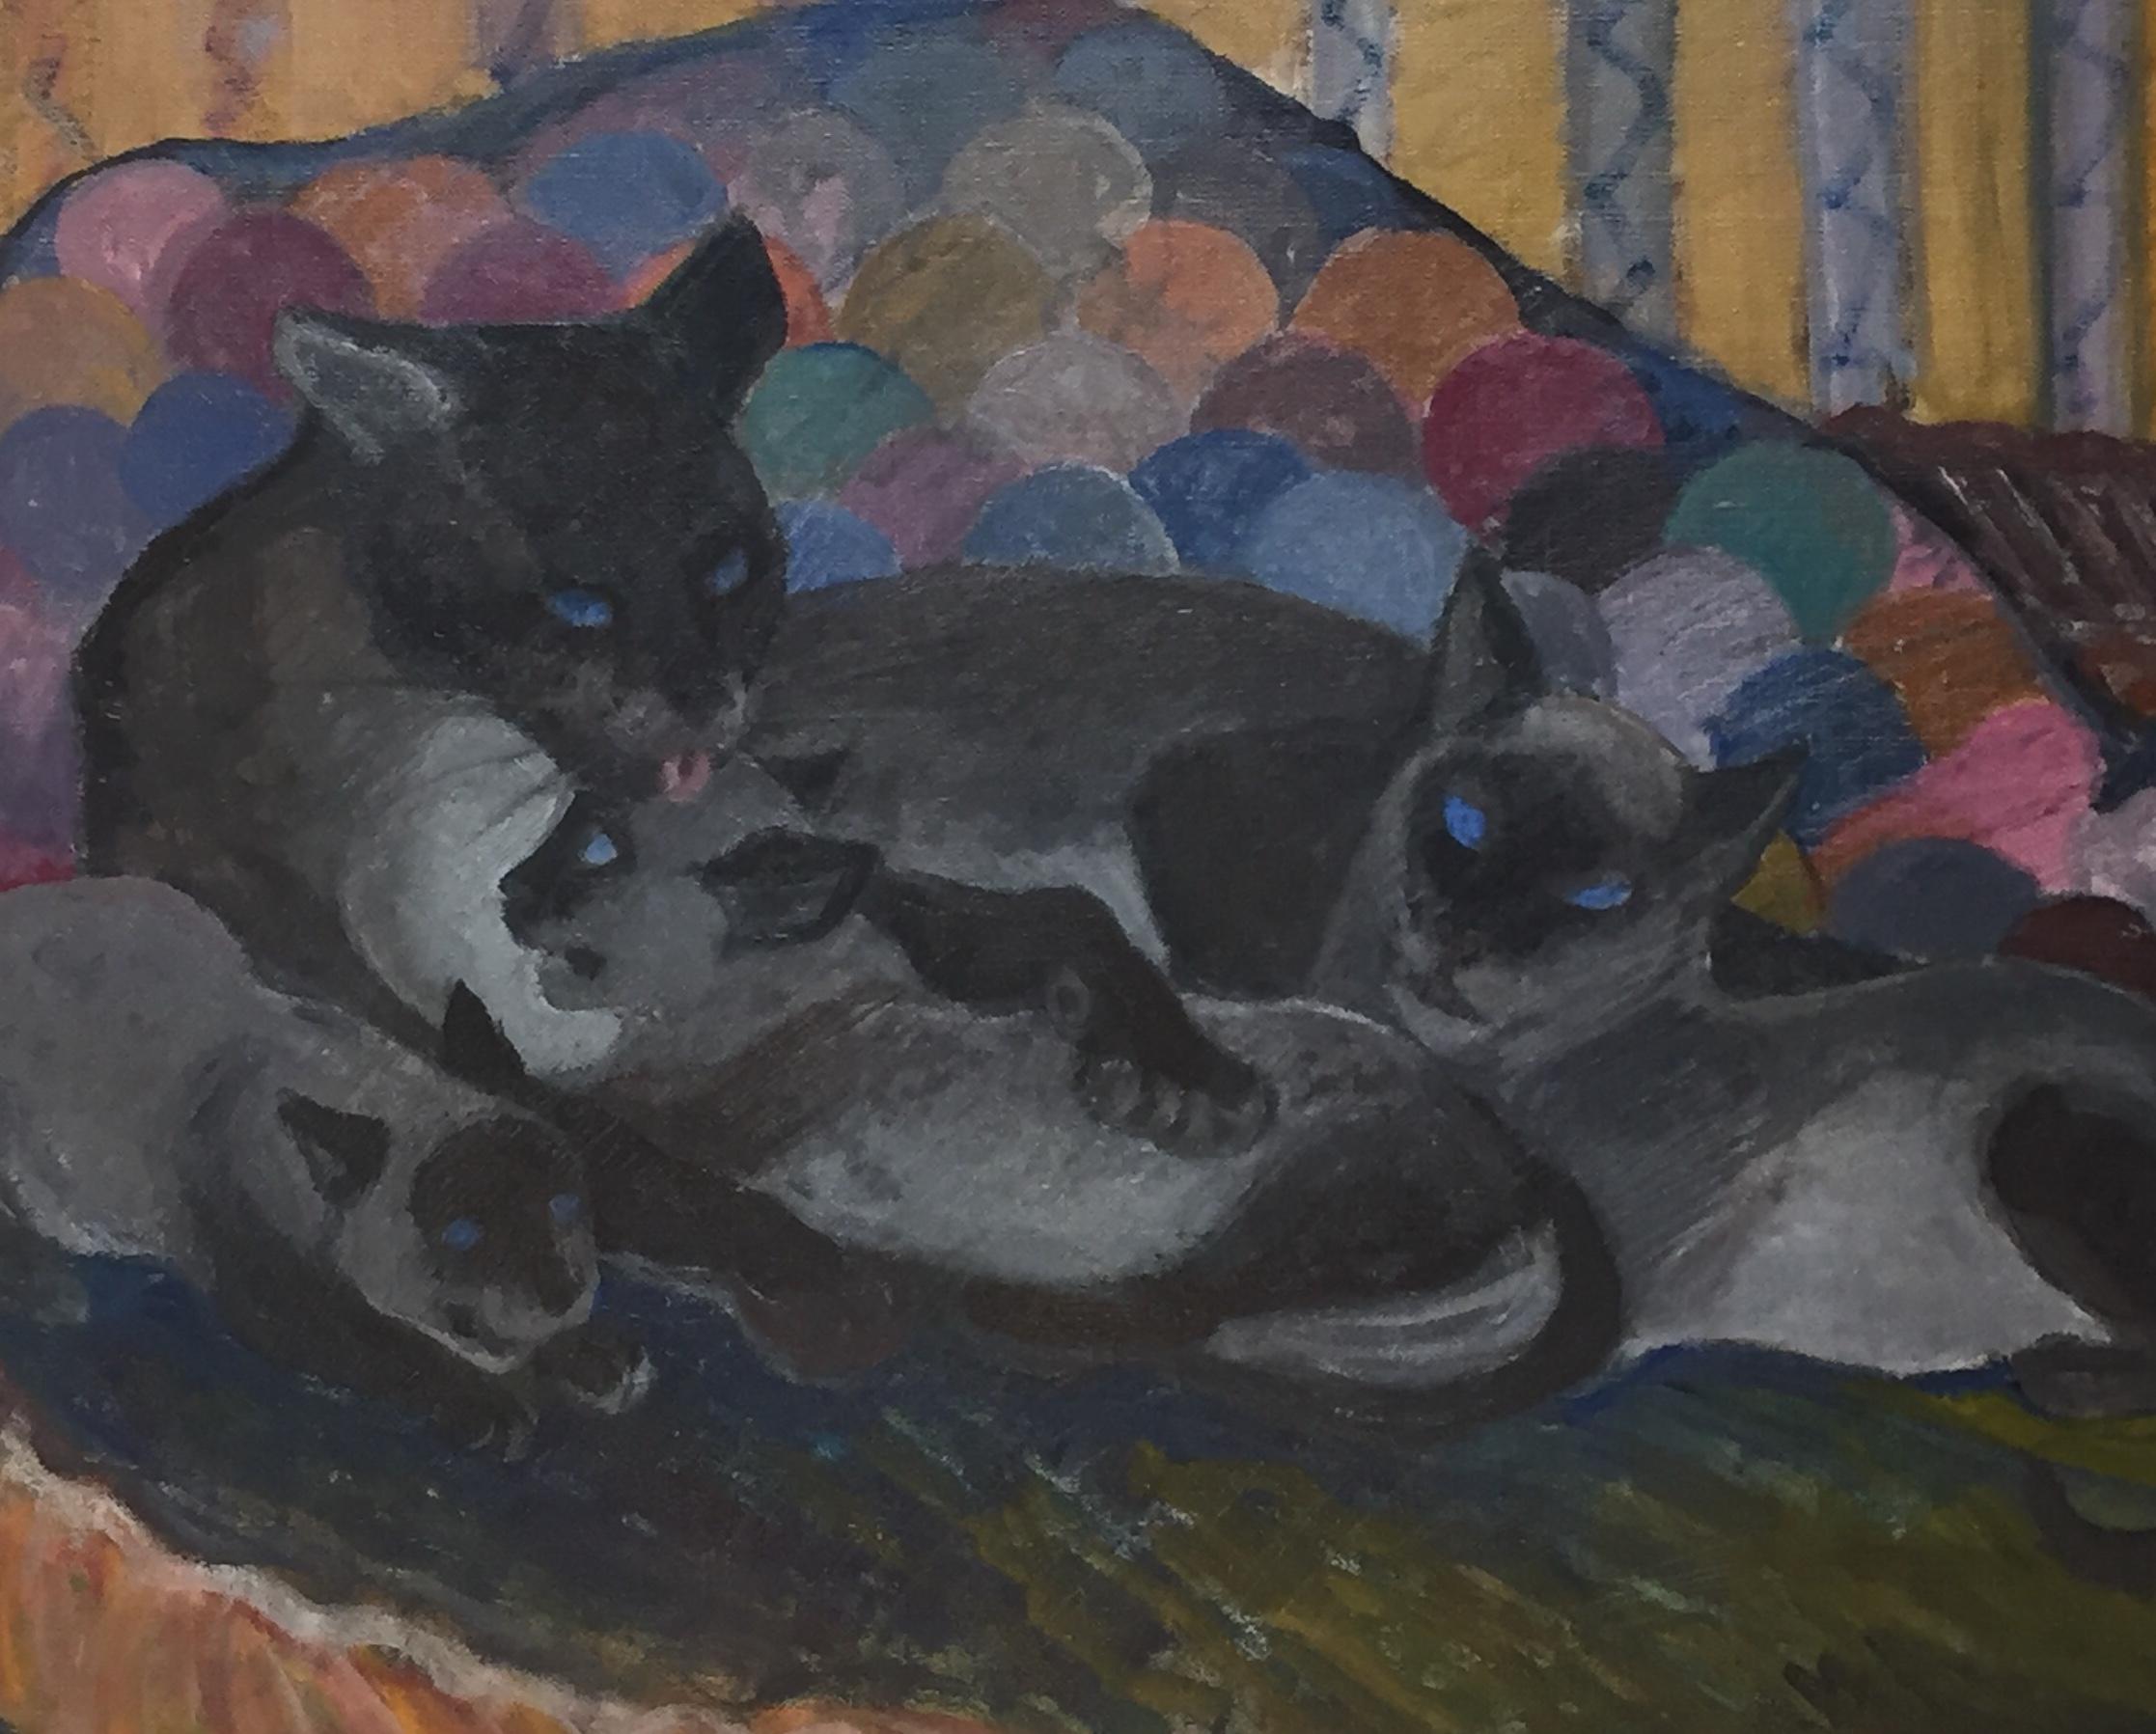 Siamese cat + kittens, oil on canvas 1961, by Orovida Pissarro, + authentication im Angebot 5